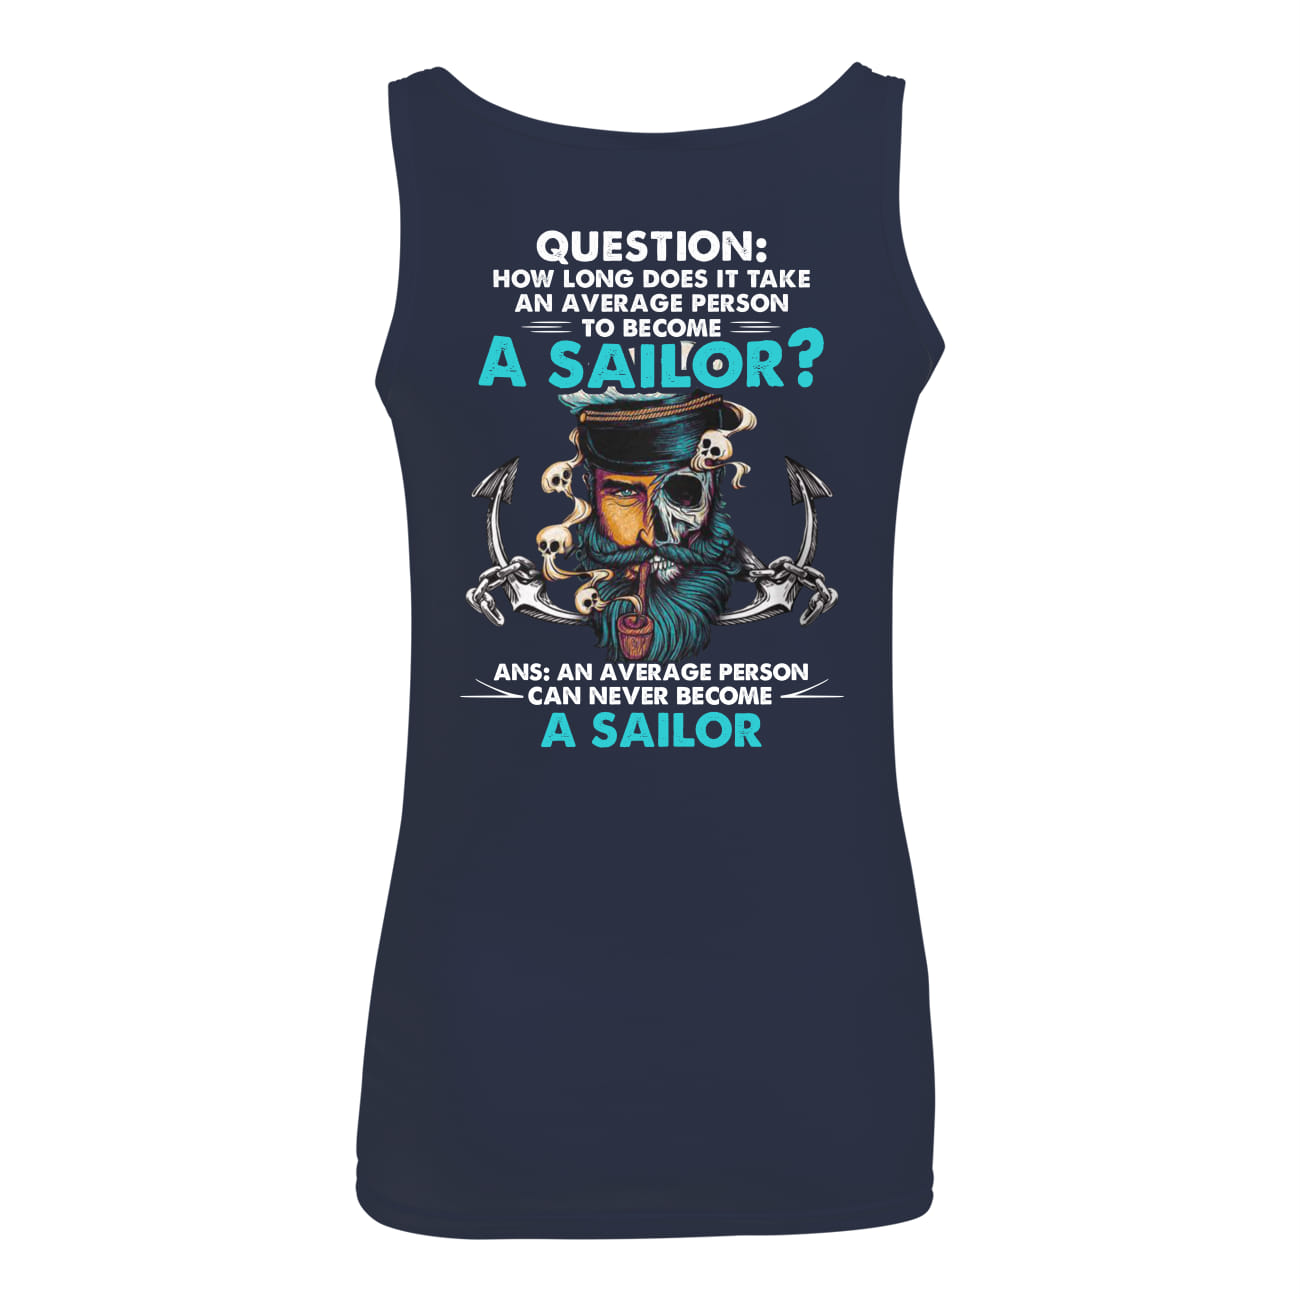 How long does it take an average person to become a sailor tank top